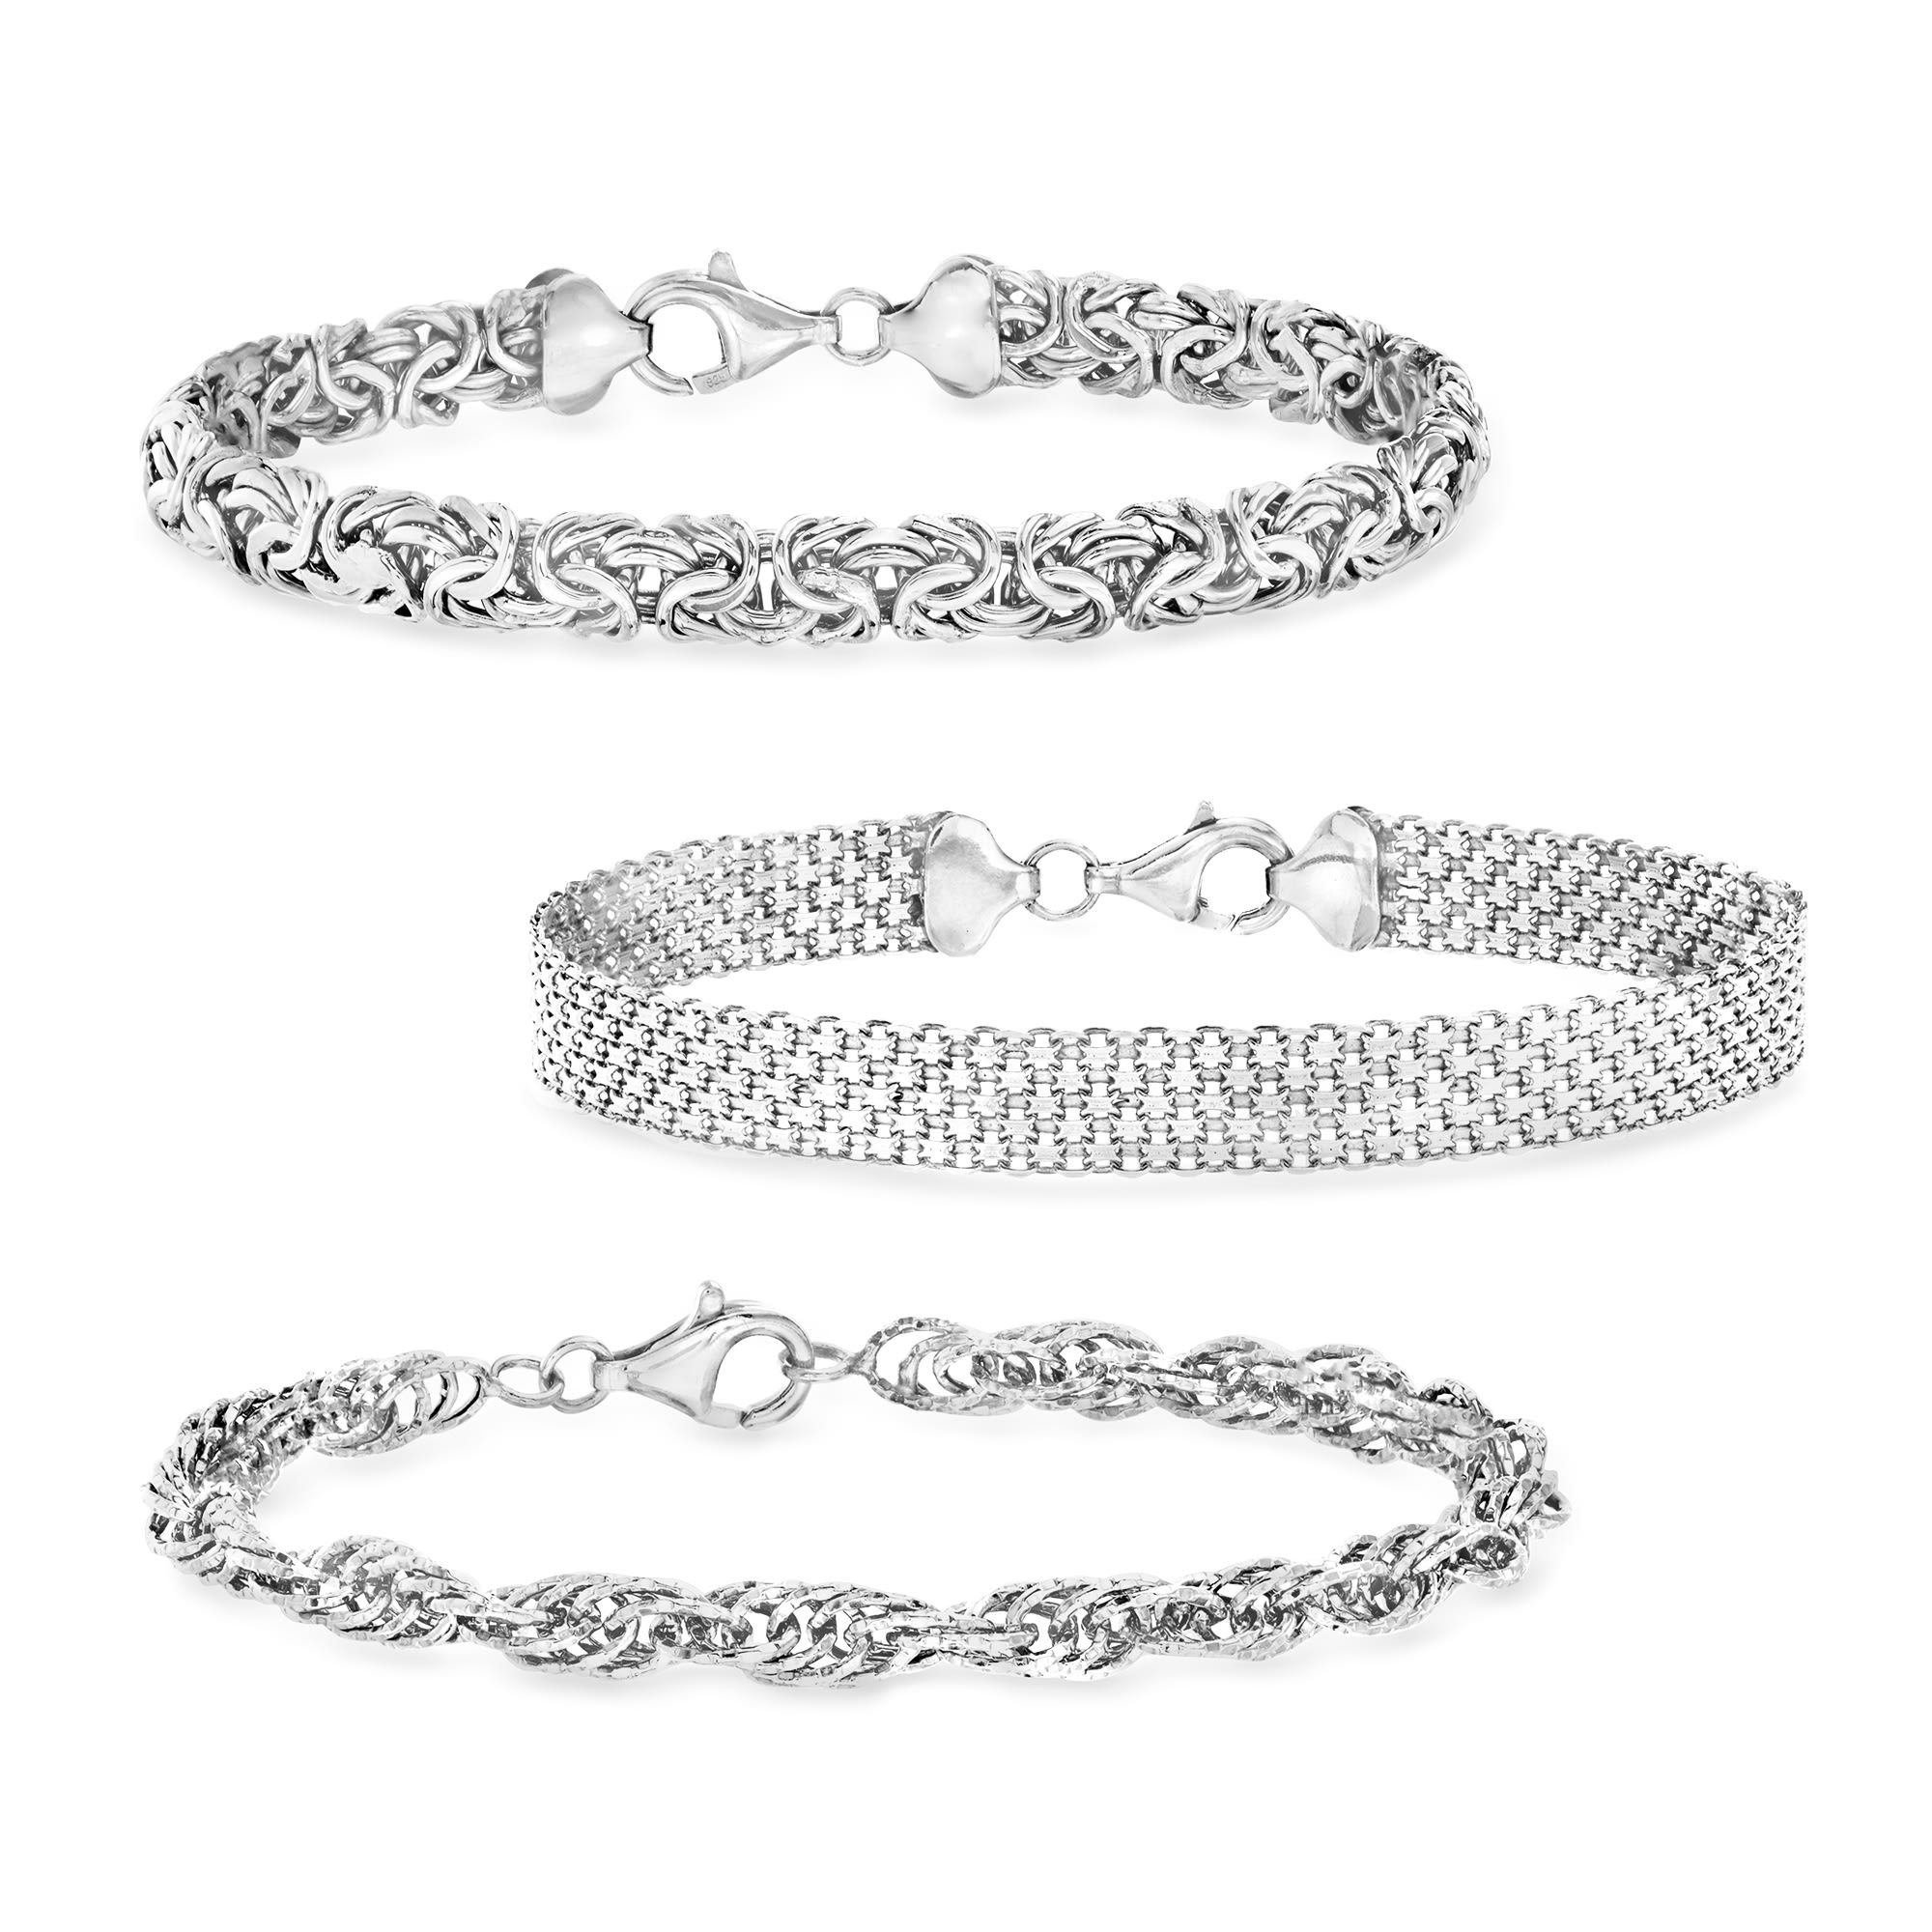 Buy ANAYRA FINE SILVER JEWELLERY Contemporary Silver Bracelet For Women,  Hallmarked 925 Silver Bracelet For Women, Minimalist Jewellery, Aesthetic  Bracelet, Sterling Silver Bracelets, Bracelets For Women at Amazon.in